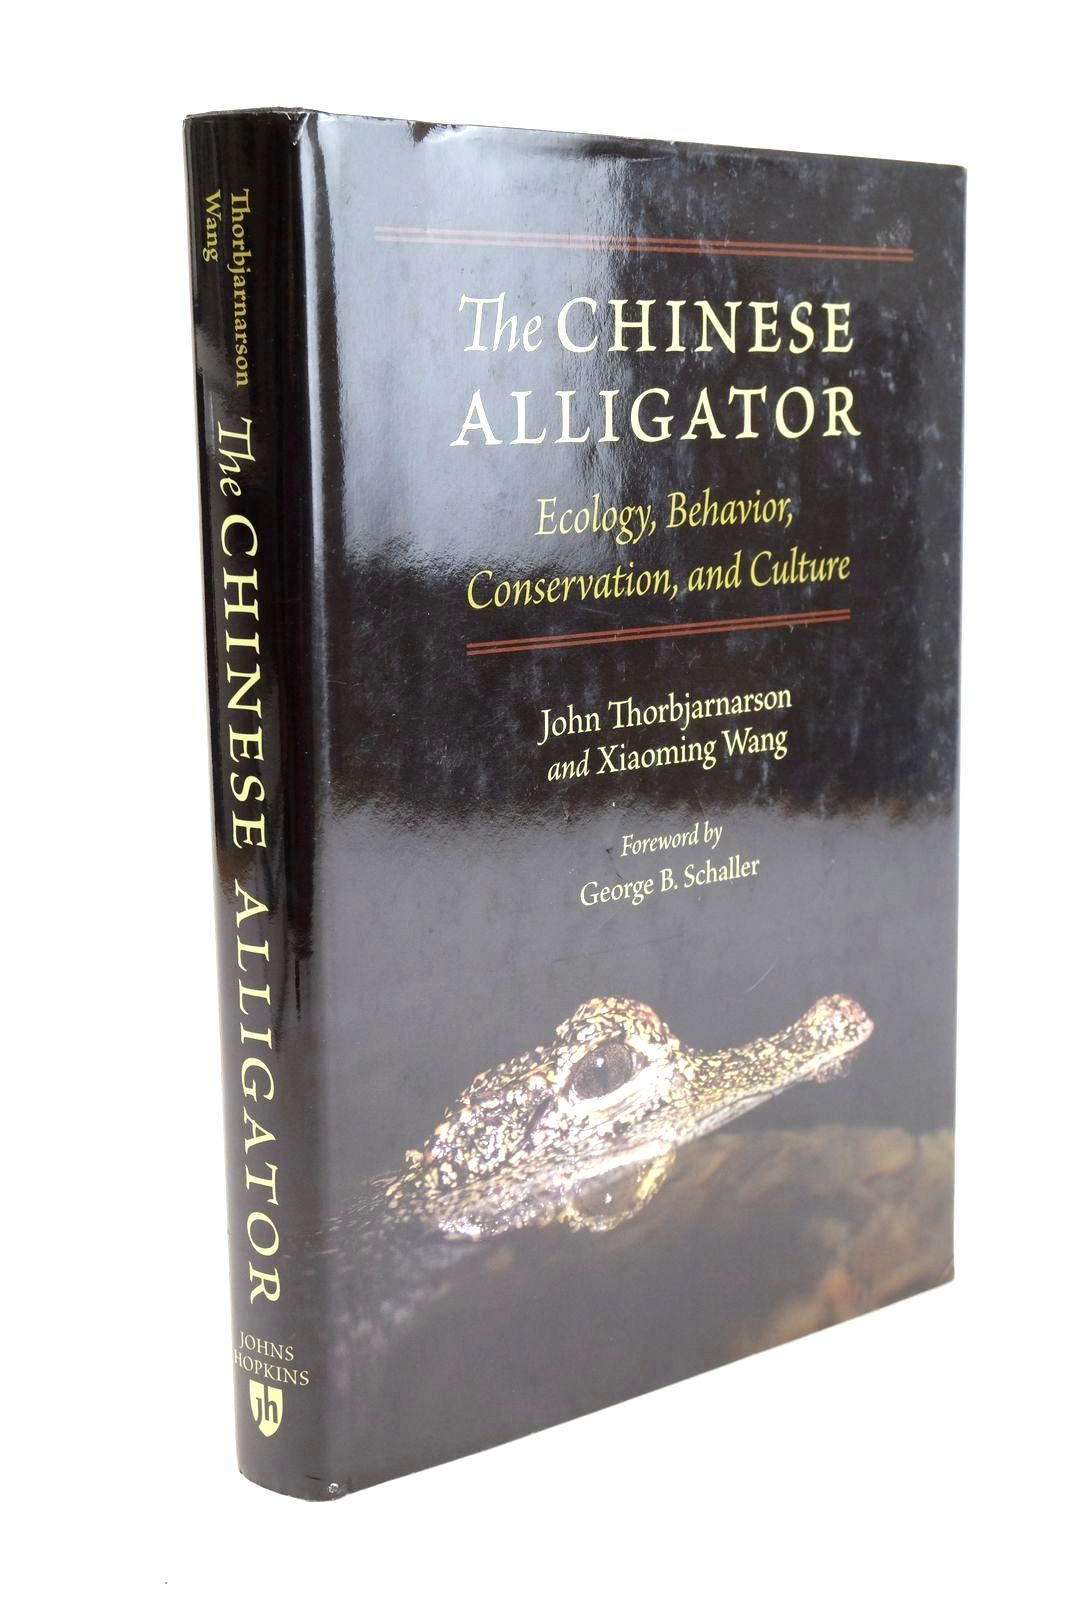 Photo of THE CHINESE ALLIGATOR ECOLOGY, BEHAVIOR, CONSERVATION, AND CULTURE written by Thorbjarnarson, John
Wang, Xiaoming published by The John Hopkins University Press (STOCK CODE: 1324125)  for sale by Stella & Rose's Books